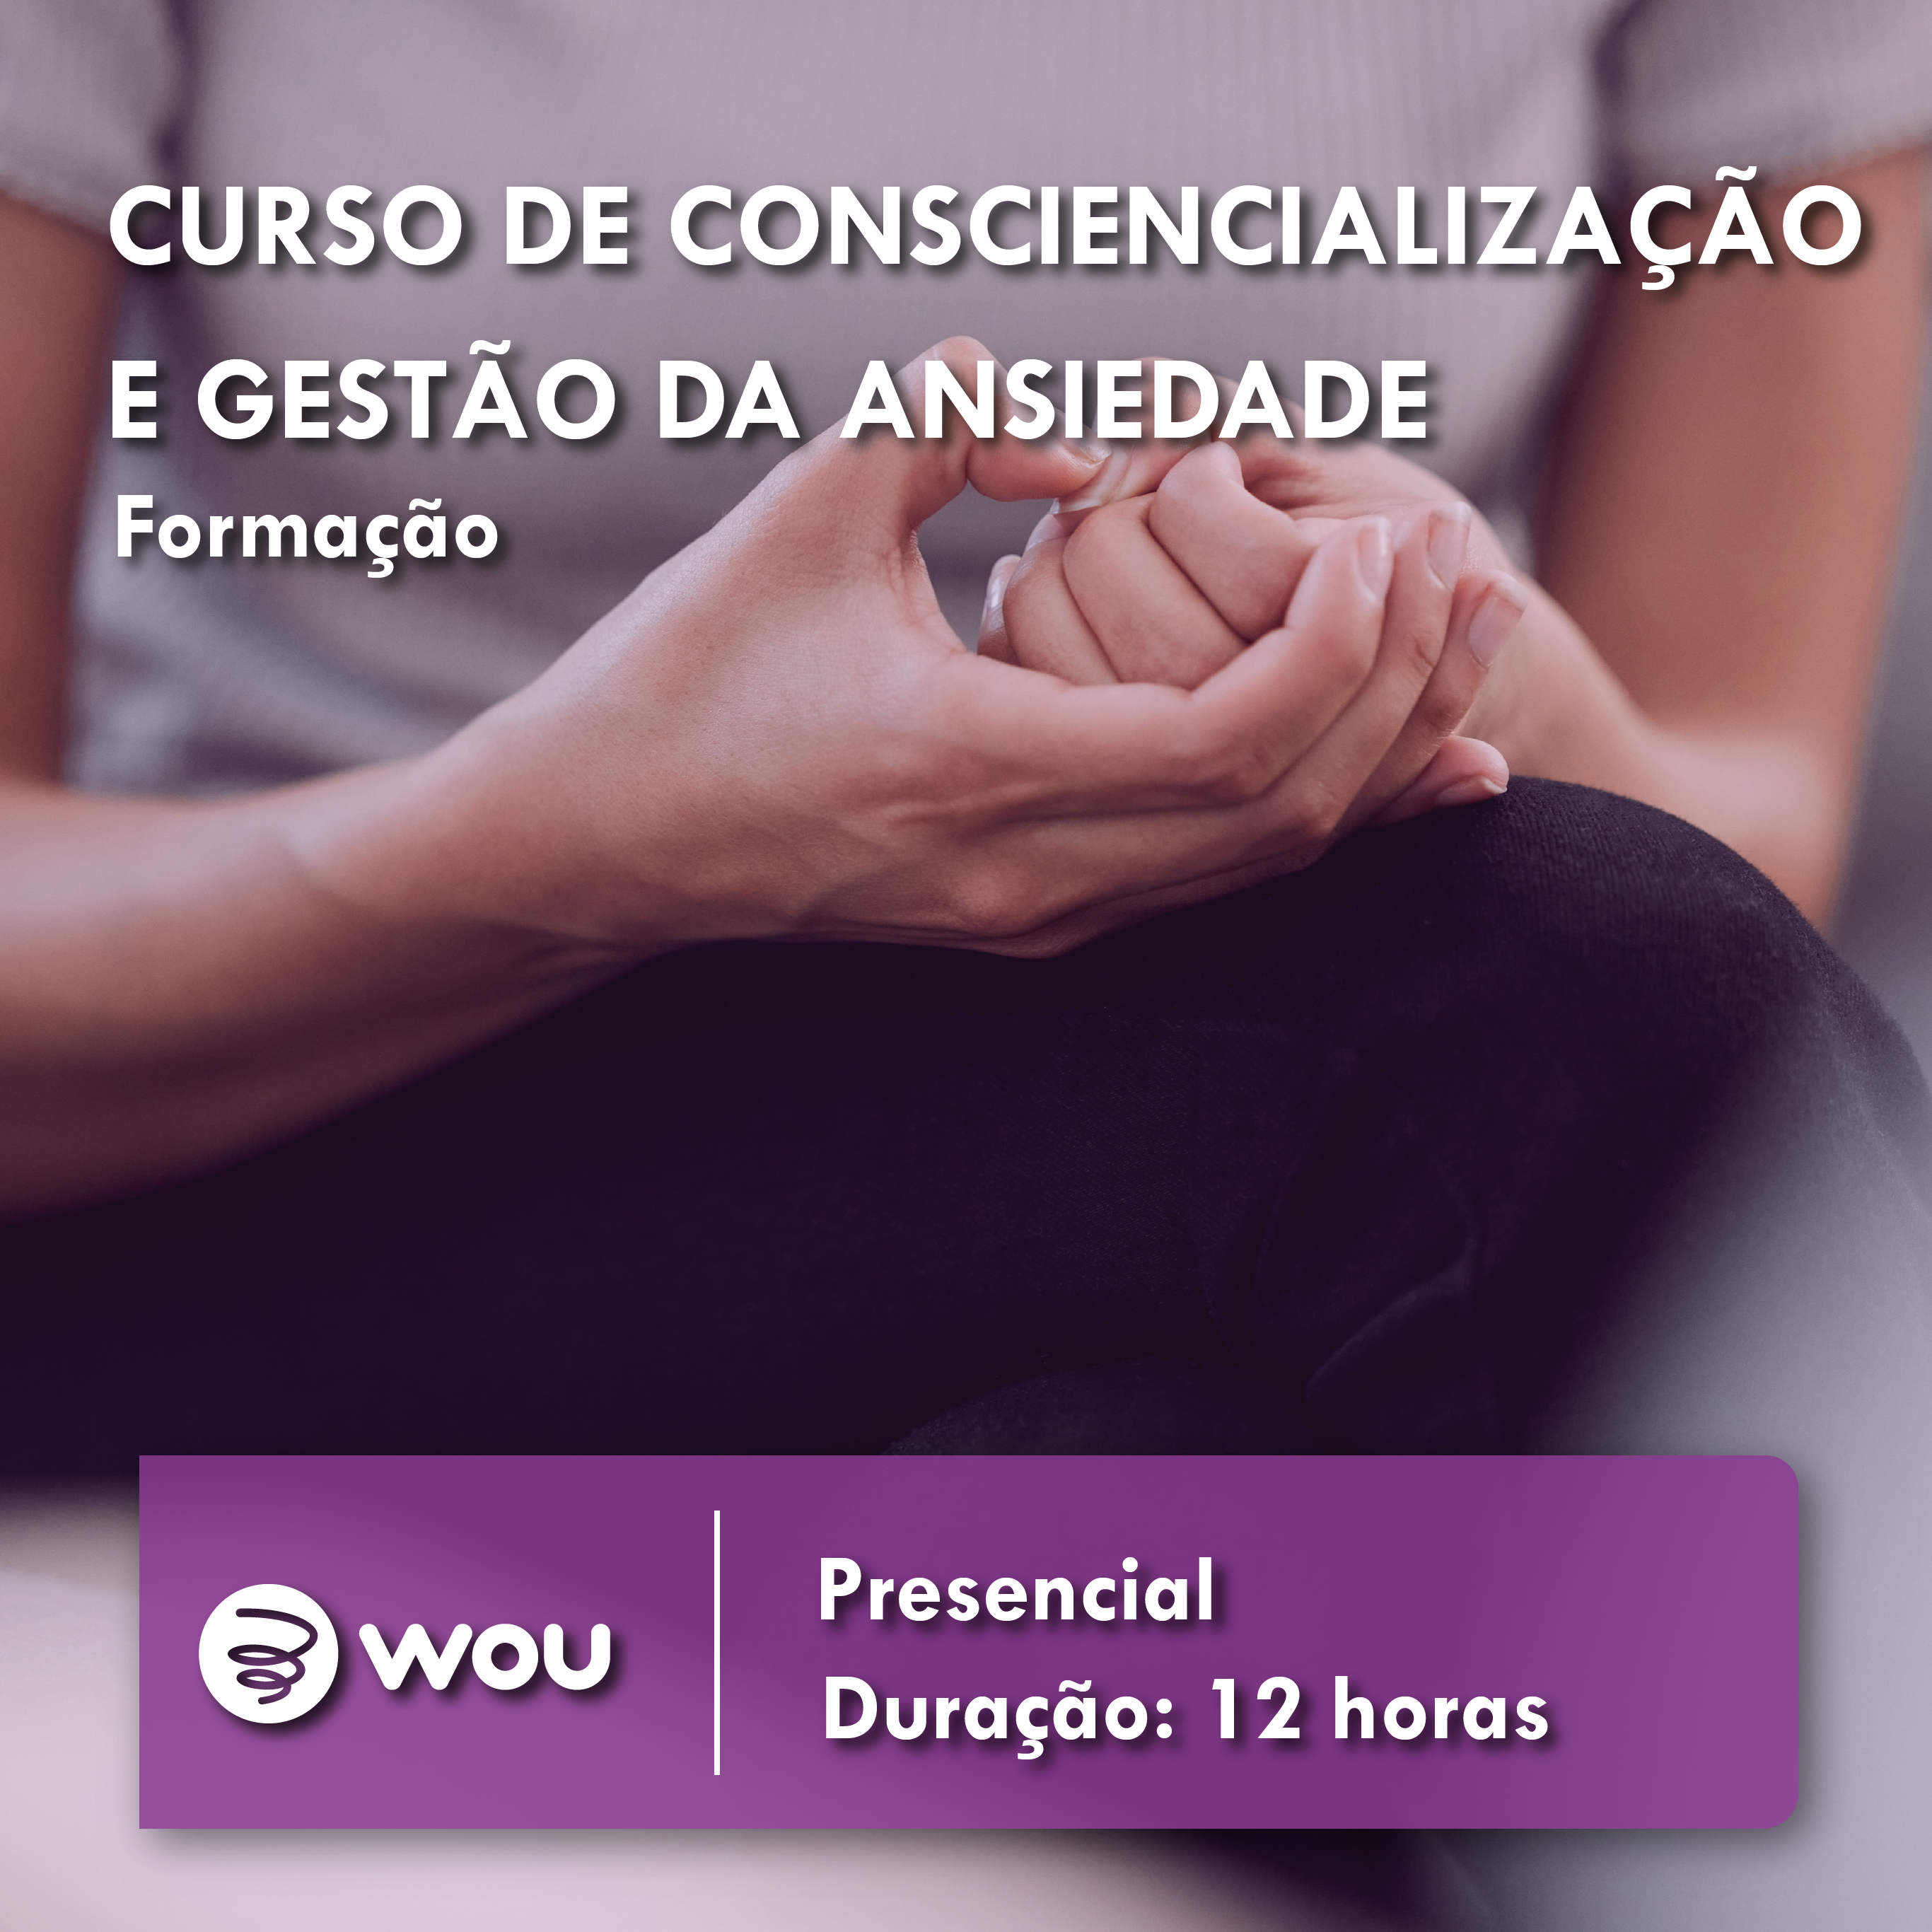 Course on Anxiety Awareness and Management in Figueira da Foz